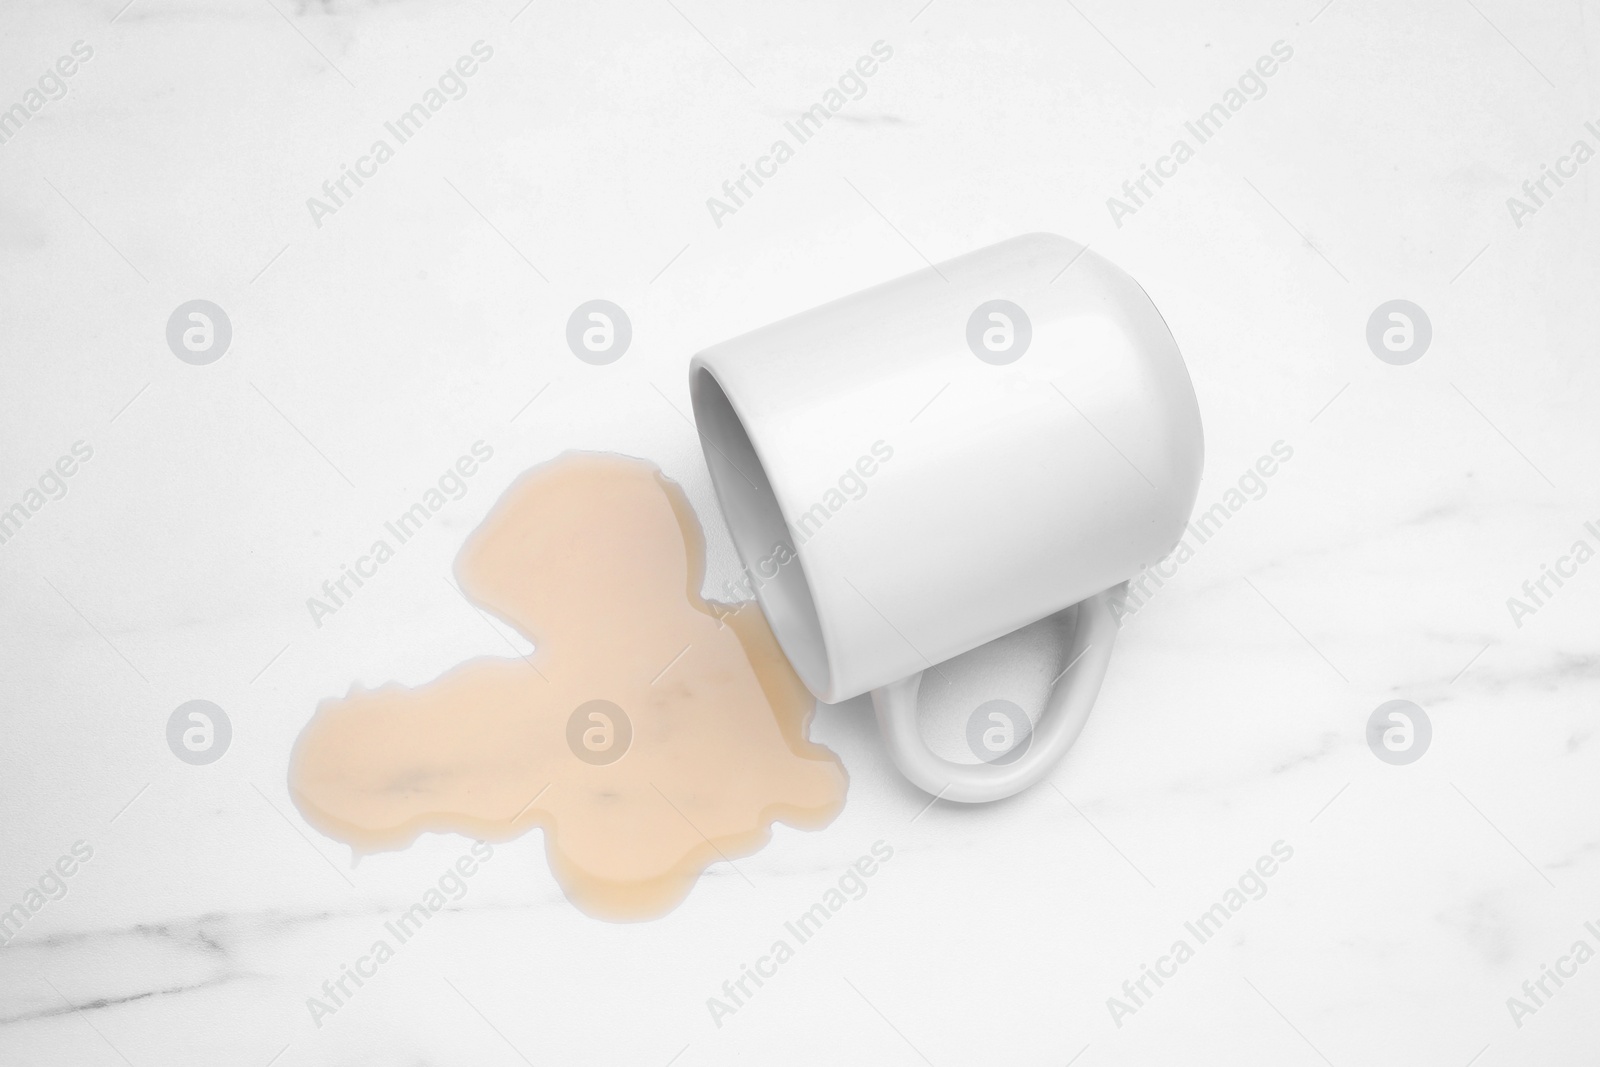 Photo of Puddle of liquid and overturned mug on white marble table, top view